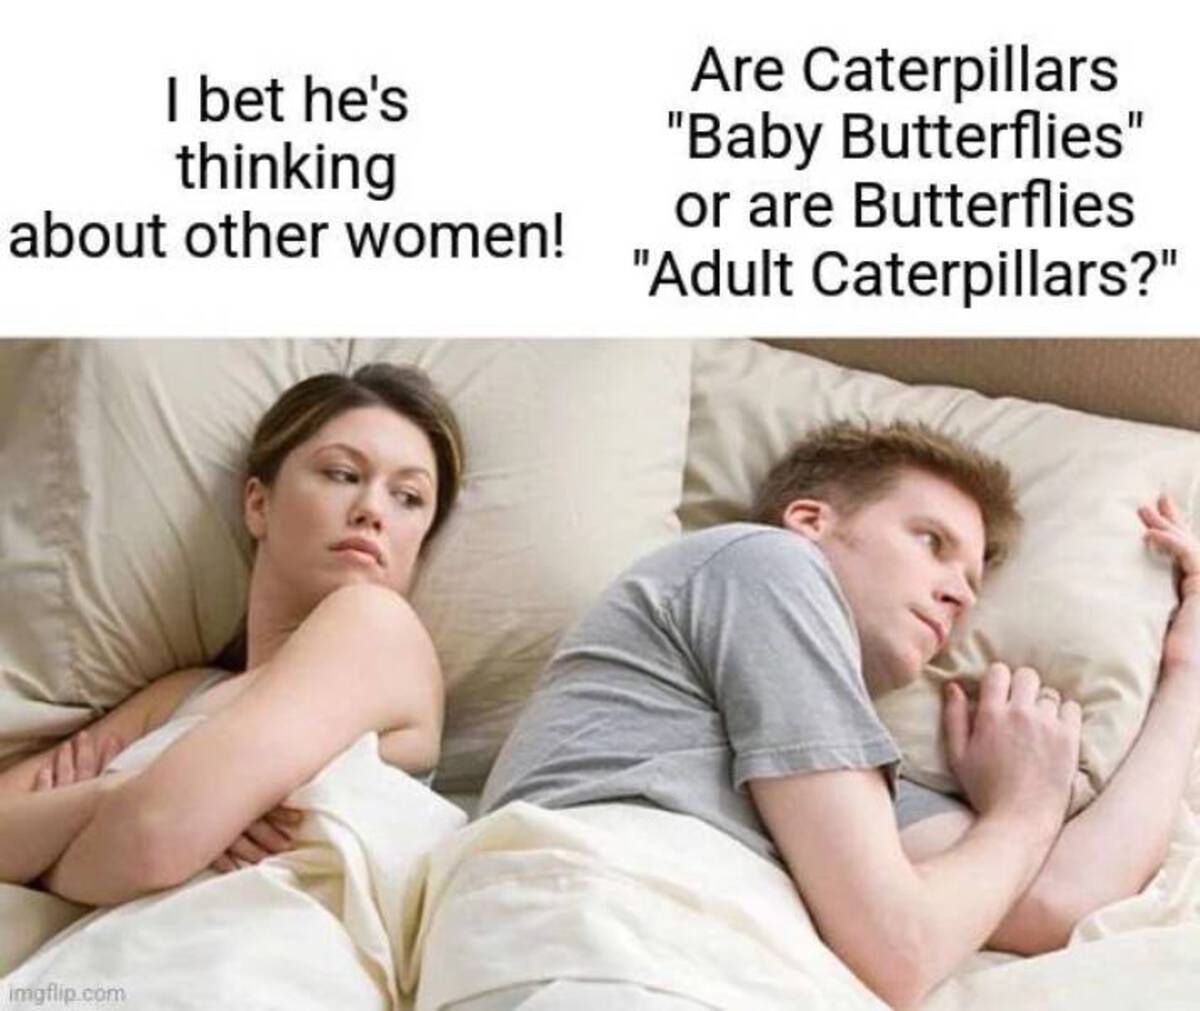 must be thinking of other women meme - I bet he's thinking about other women! imgflip.com Are Caterpillars "Baby Butterflies" or are Butterflies "Adult Caterpillars?"